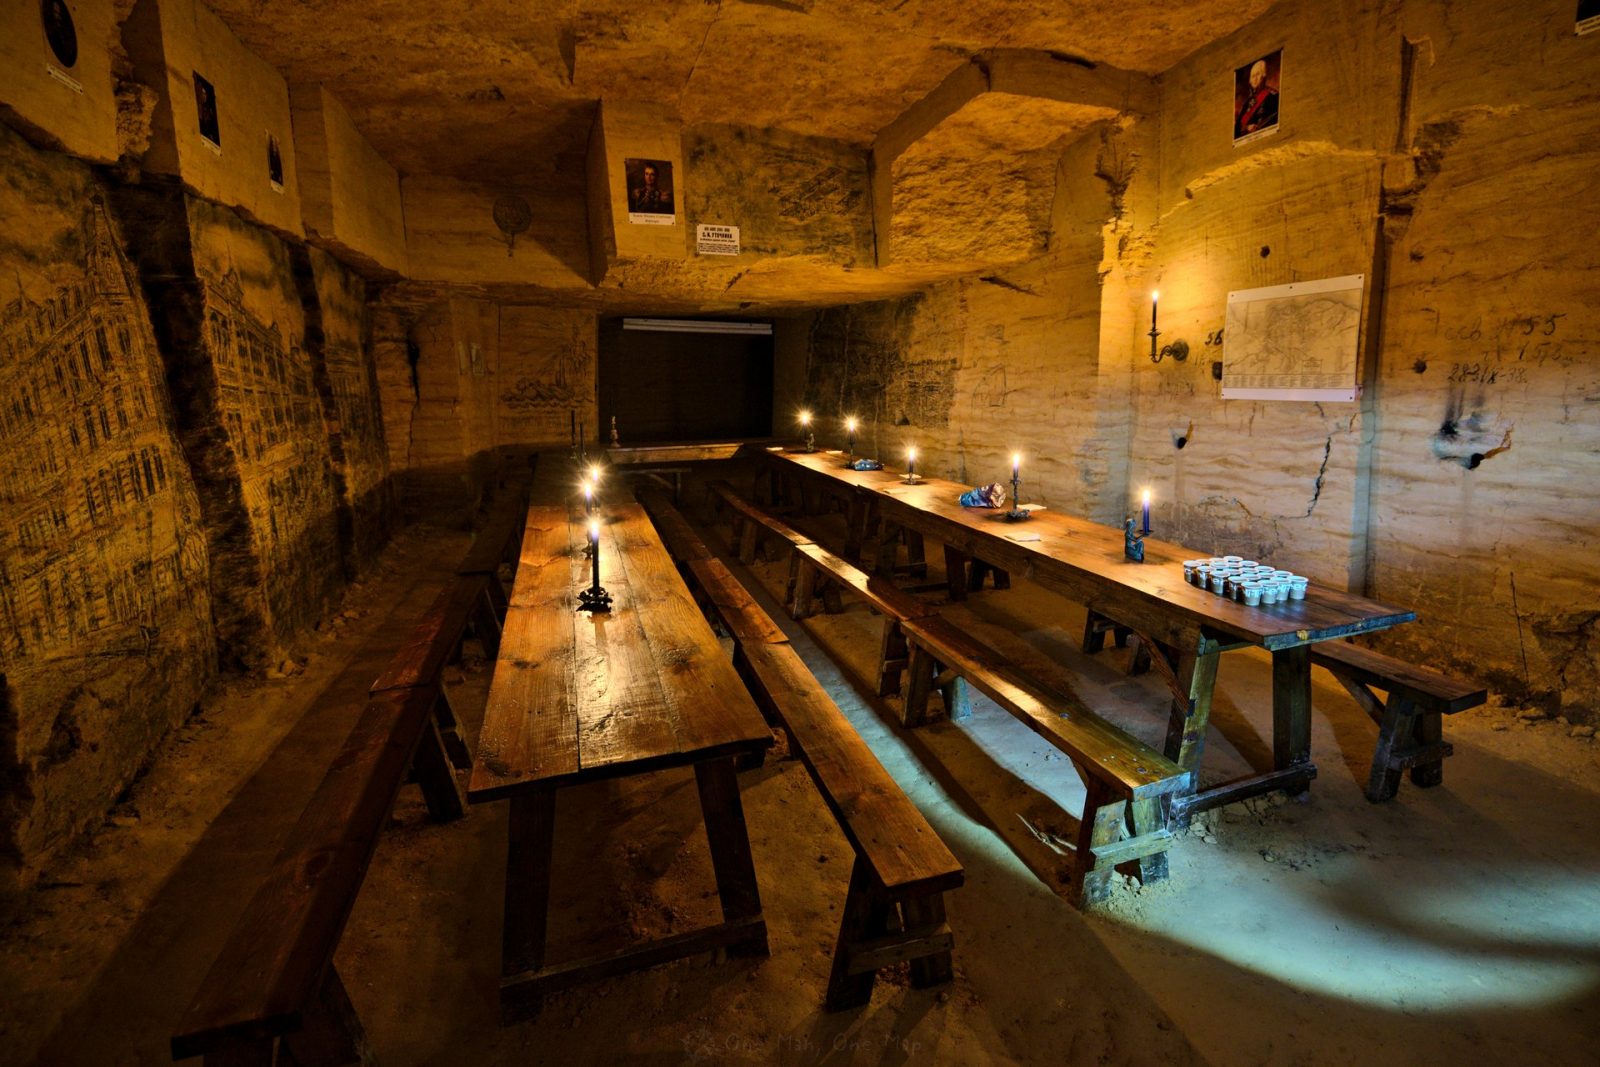 If You Can Score Over 76% On This Geography Test, You Definitely Know More Than Most People Odessa catacombs